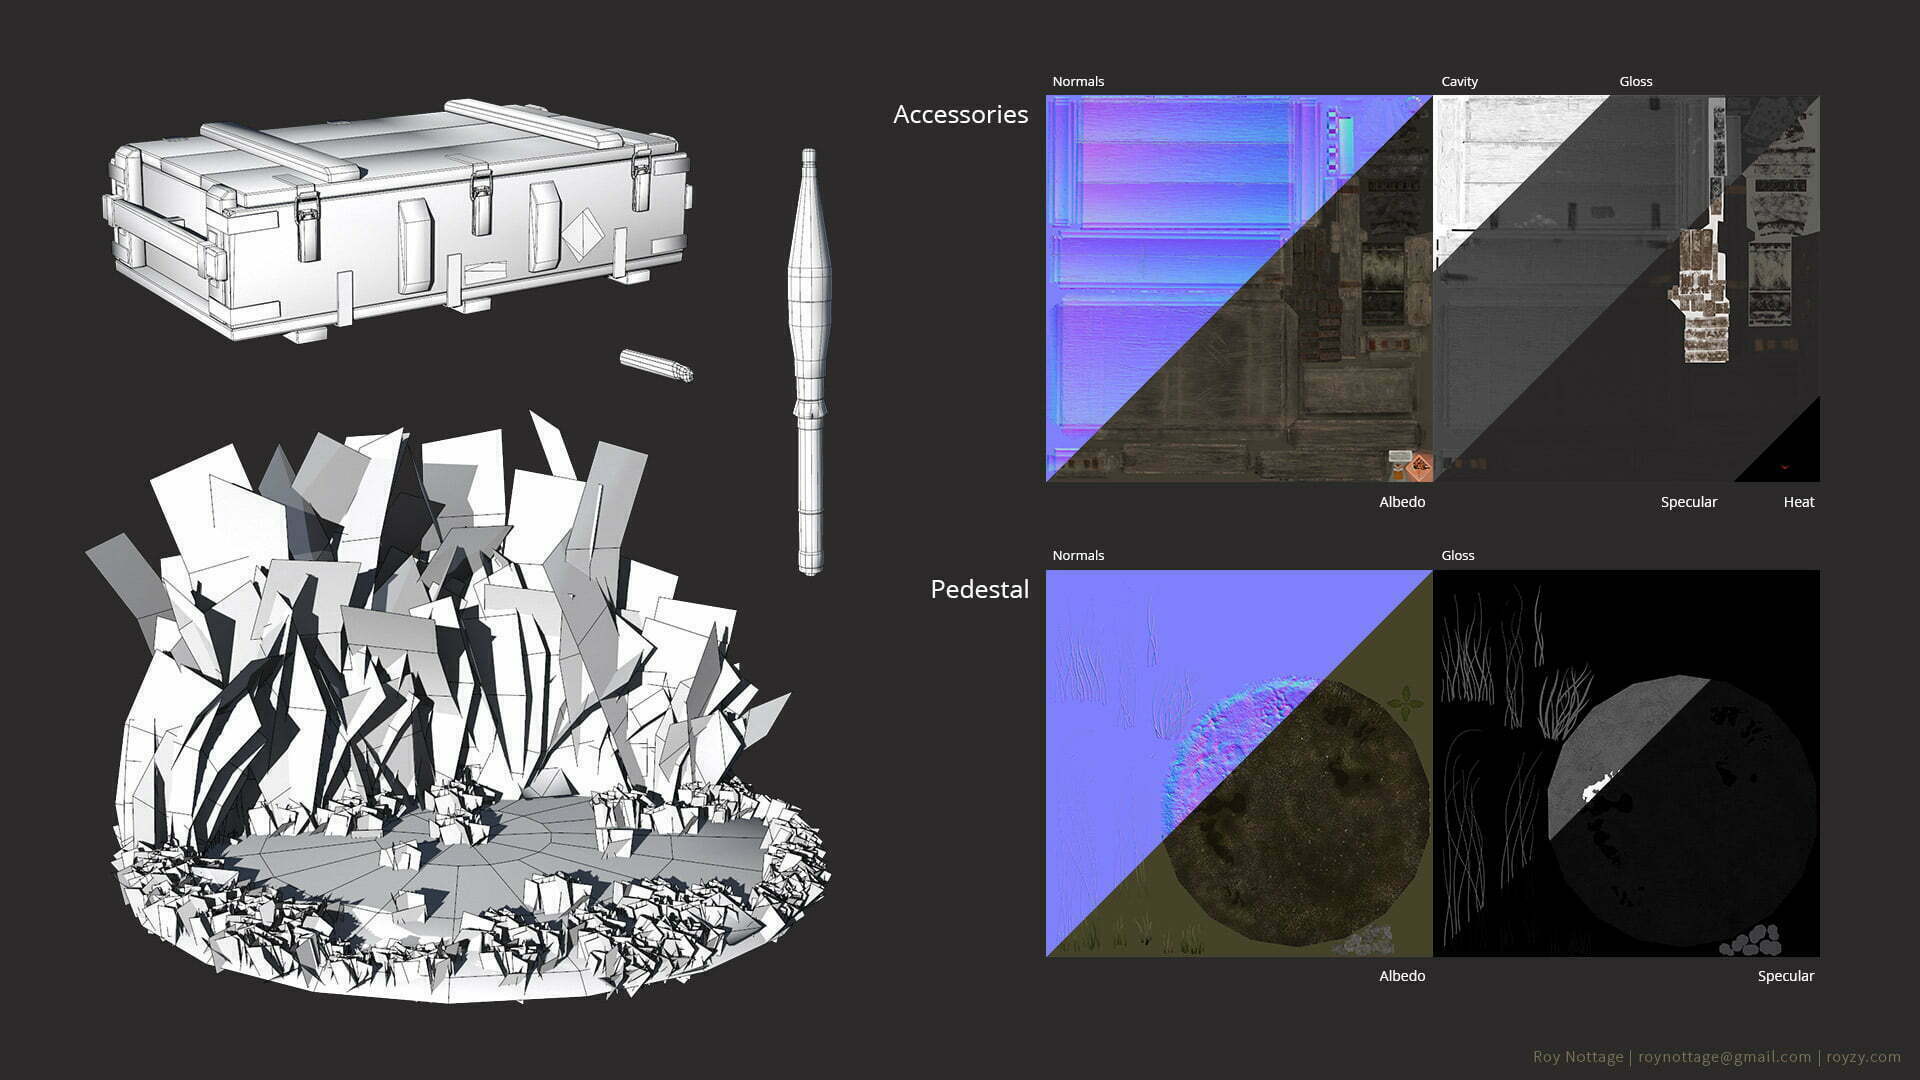 Wireframes and Textures of Accessories and Pedestal 3D Models